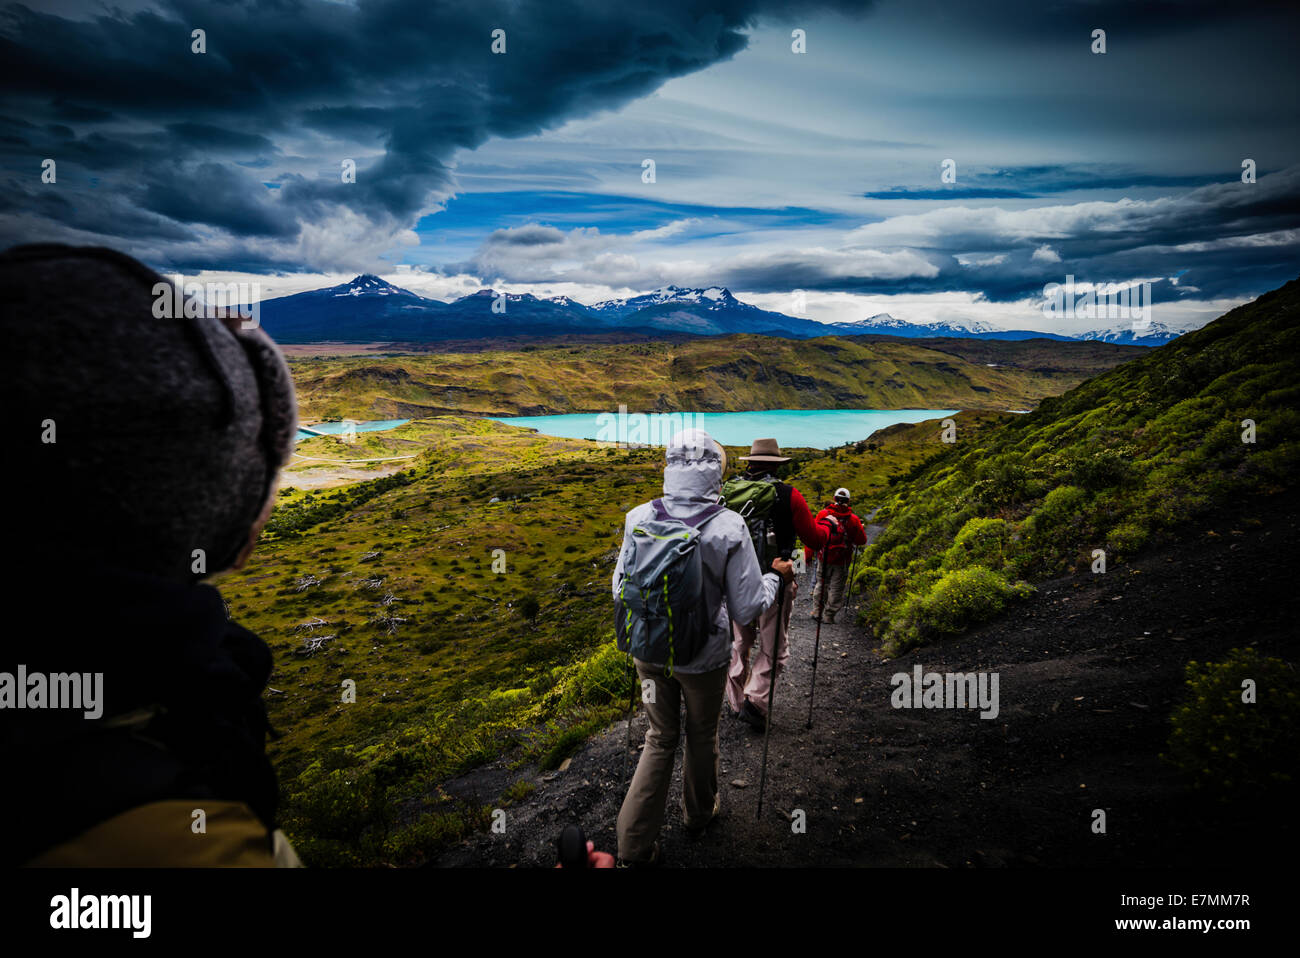 Hikers in wild Patagonia, Chile. Stock Photo